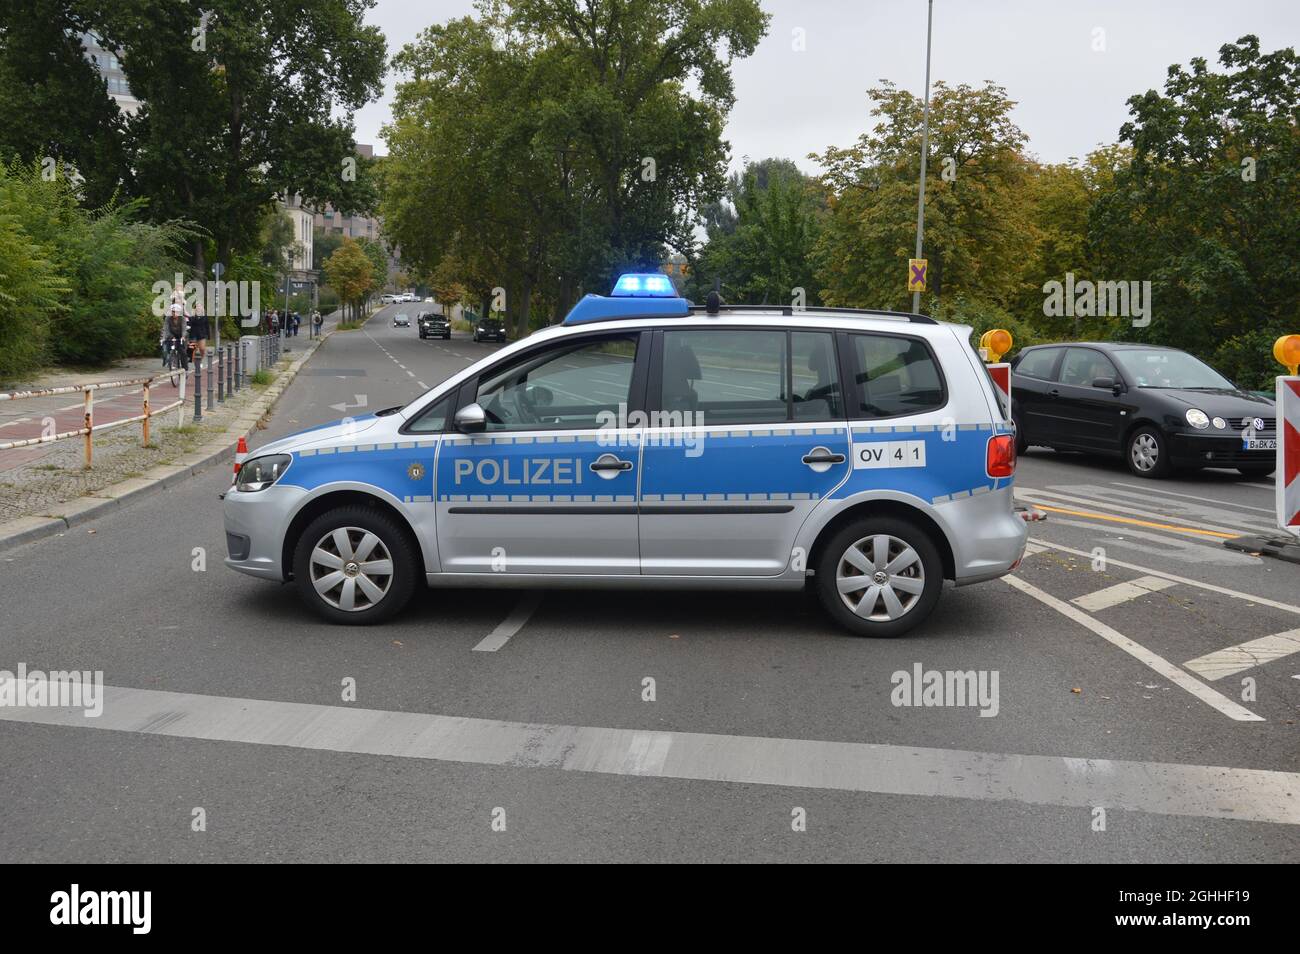 Police closed Potsdamer Strasse during the 'indivisible' demonstration in Berlin, Germany - September 4, 2021. Stock Photo